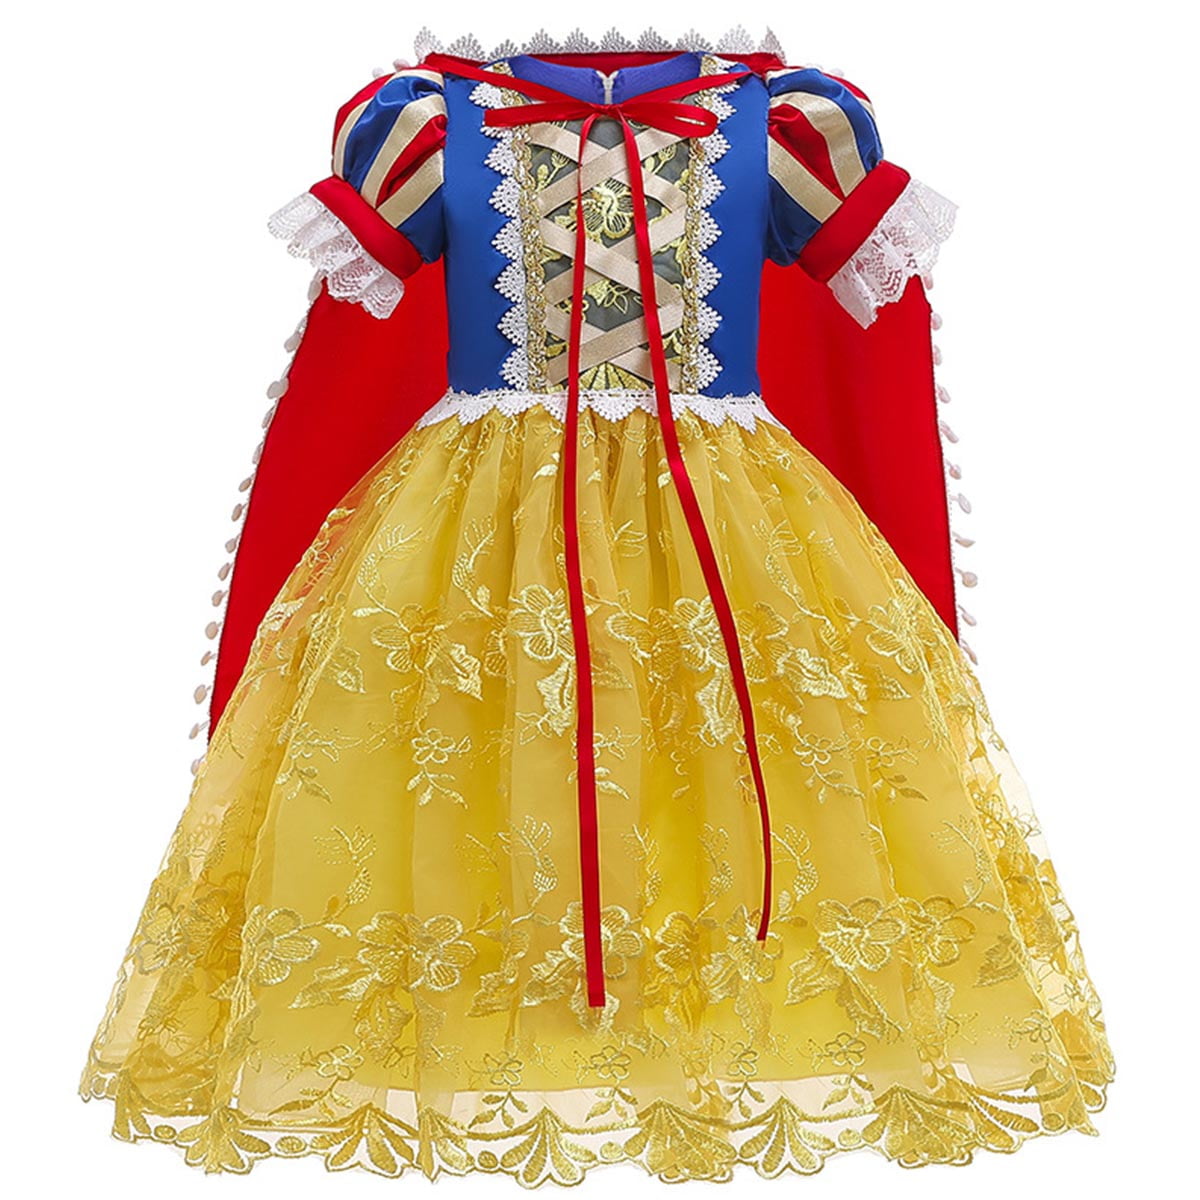 Snow White Princess Fancy Dress Up Costume Outfit Party 4 Piece Set Age 1-4 Year 